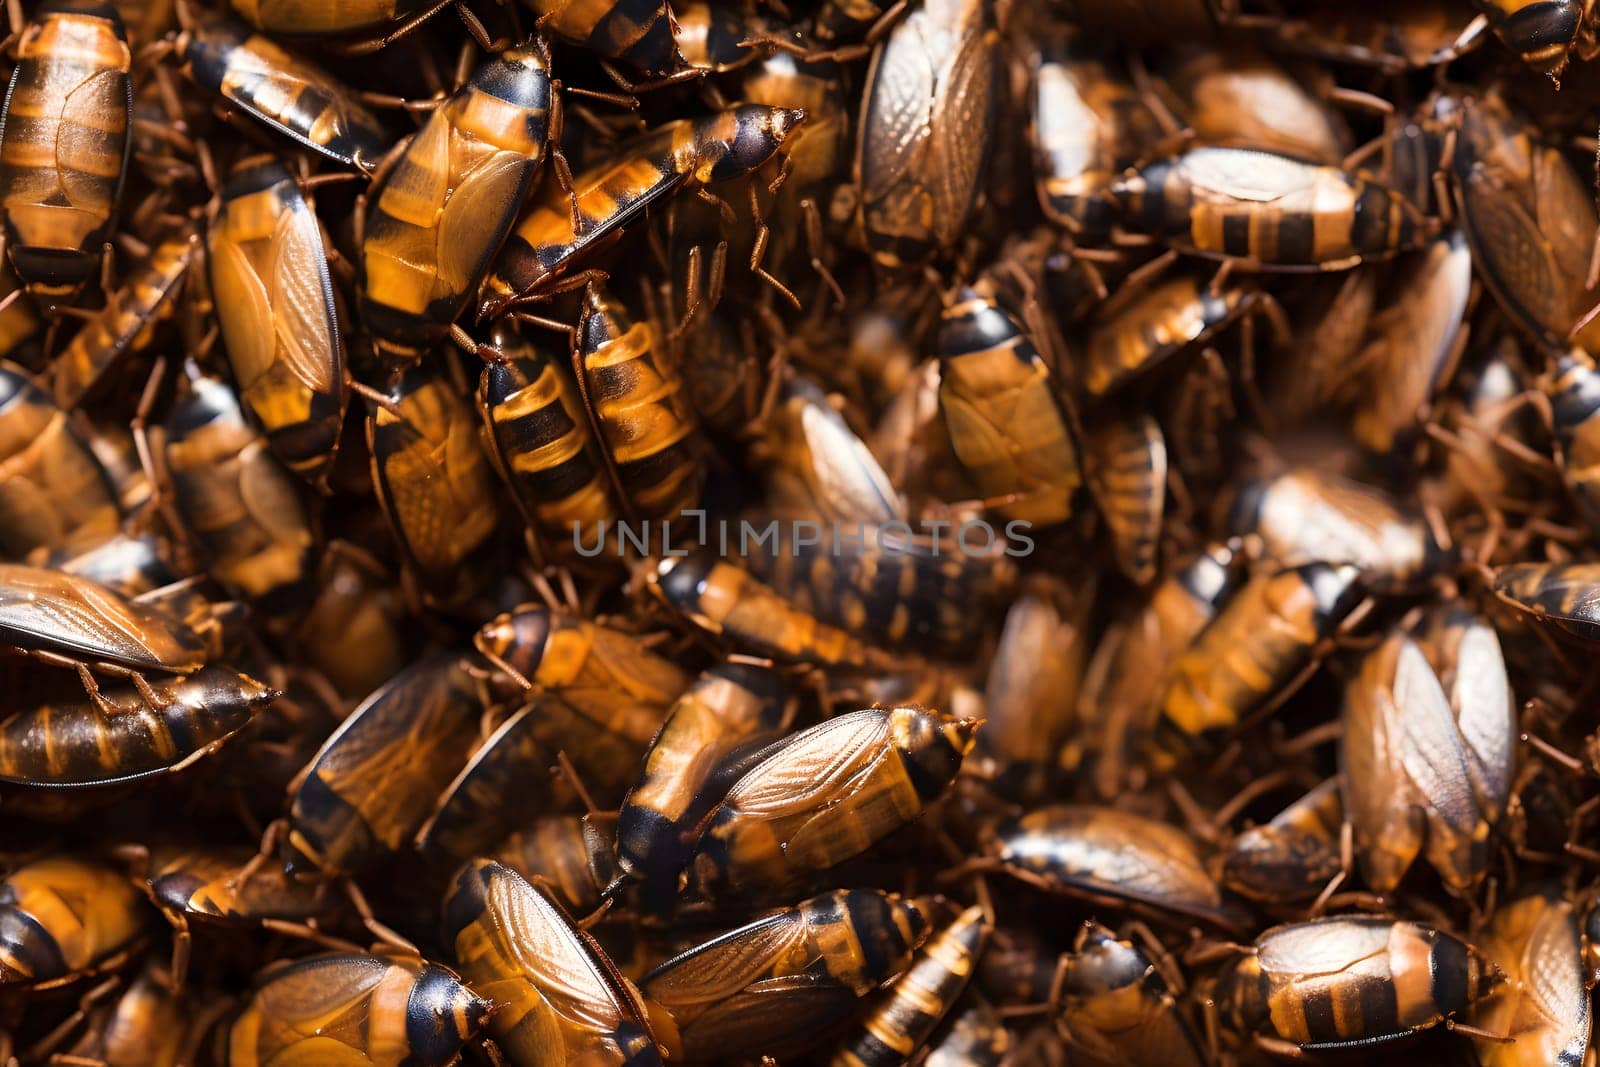 seamless texture and background of pile of cockroaches, neural network generated photorealistic image by z1b